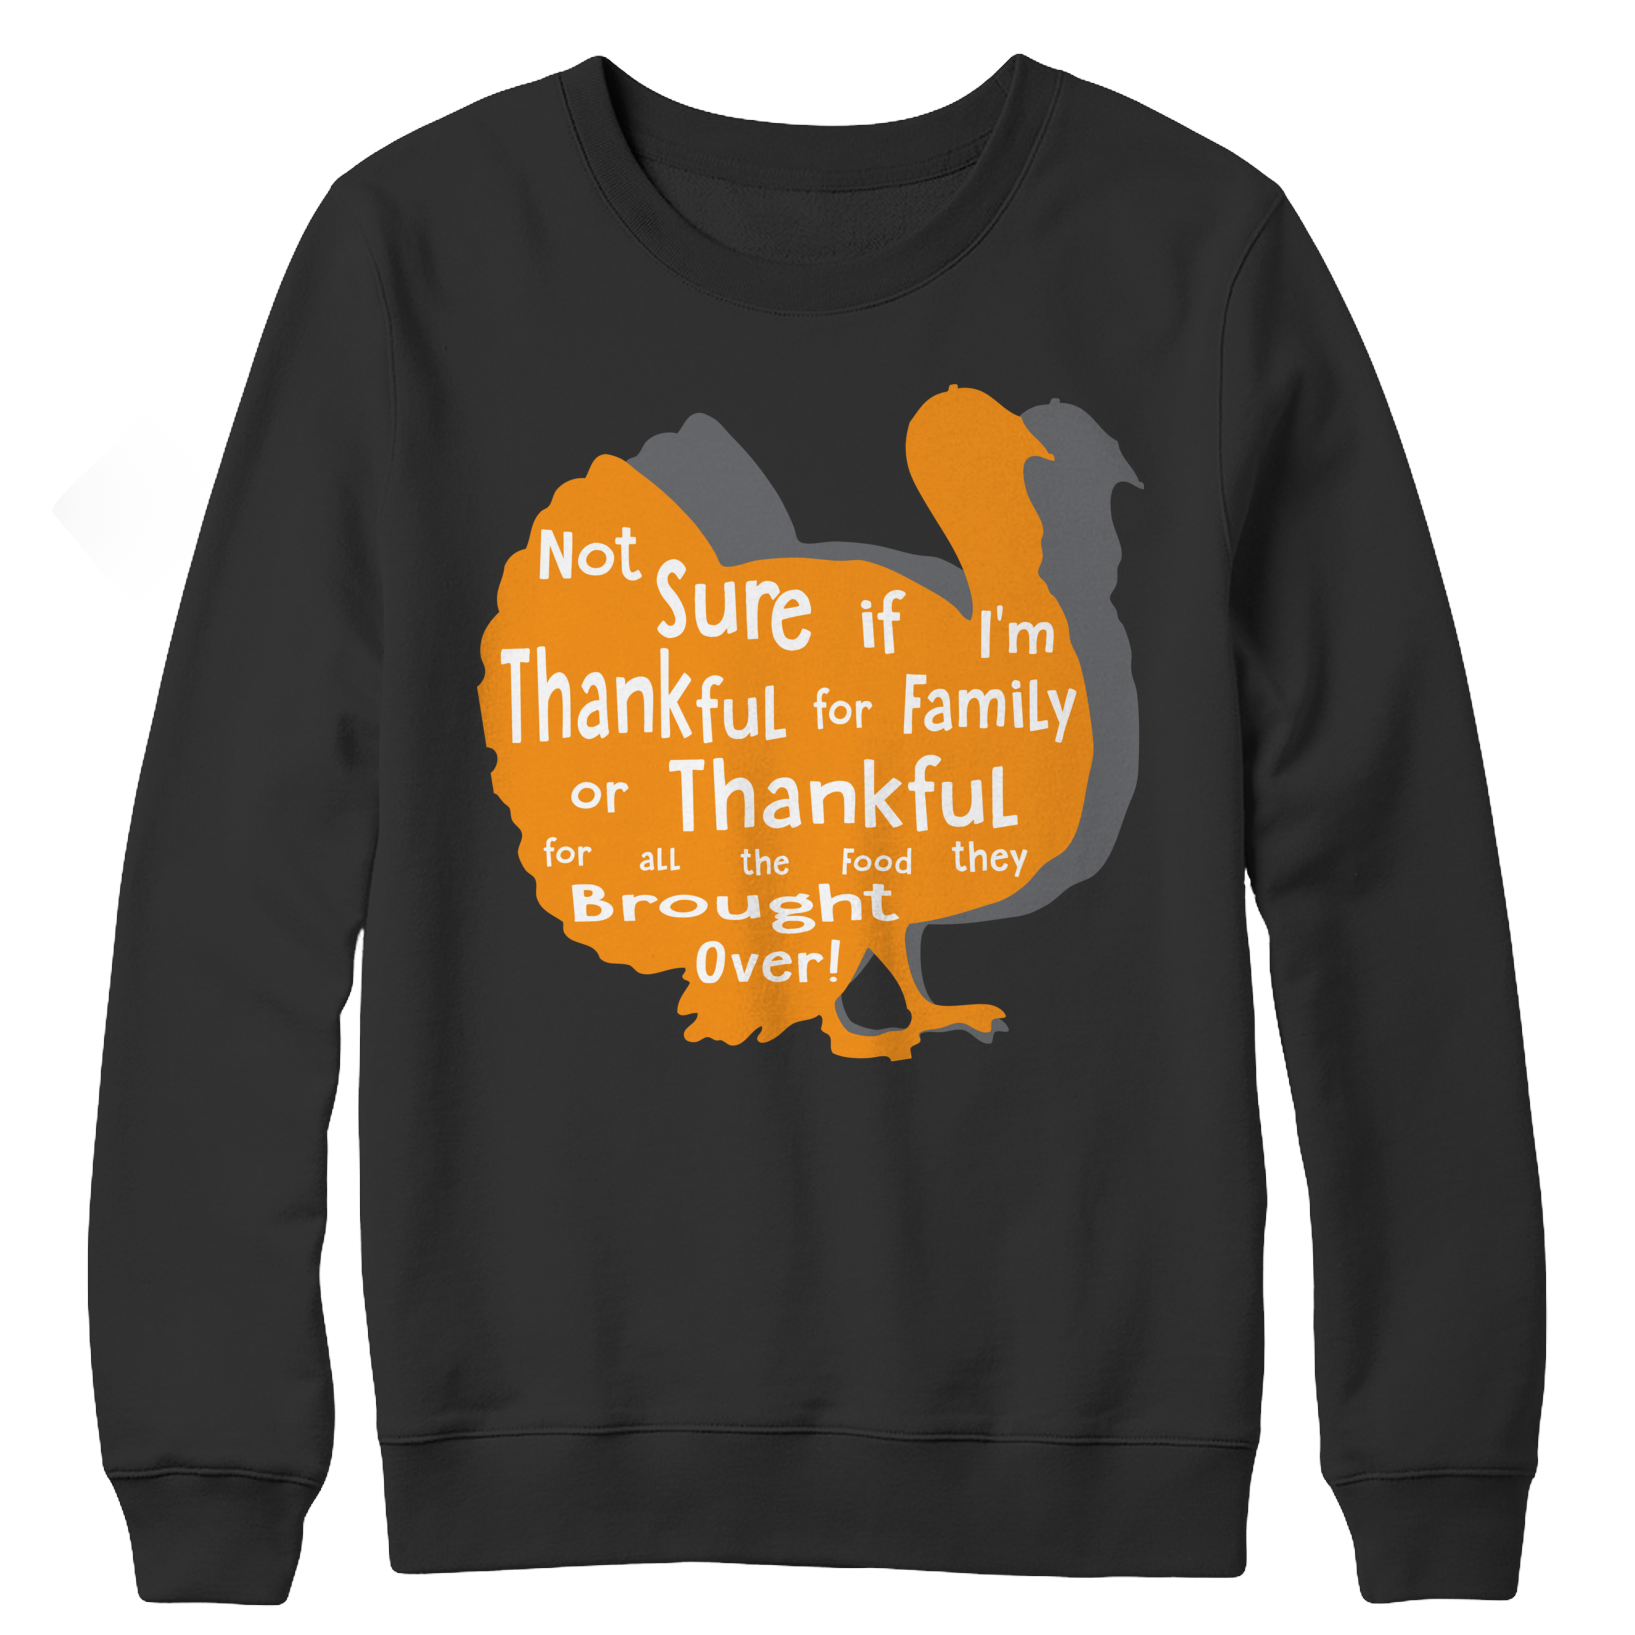 Limited Edition - Not Sure if I'm thankful for family or thankful for.... Crewneck Fleece Shirt